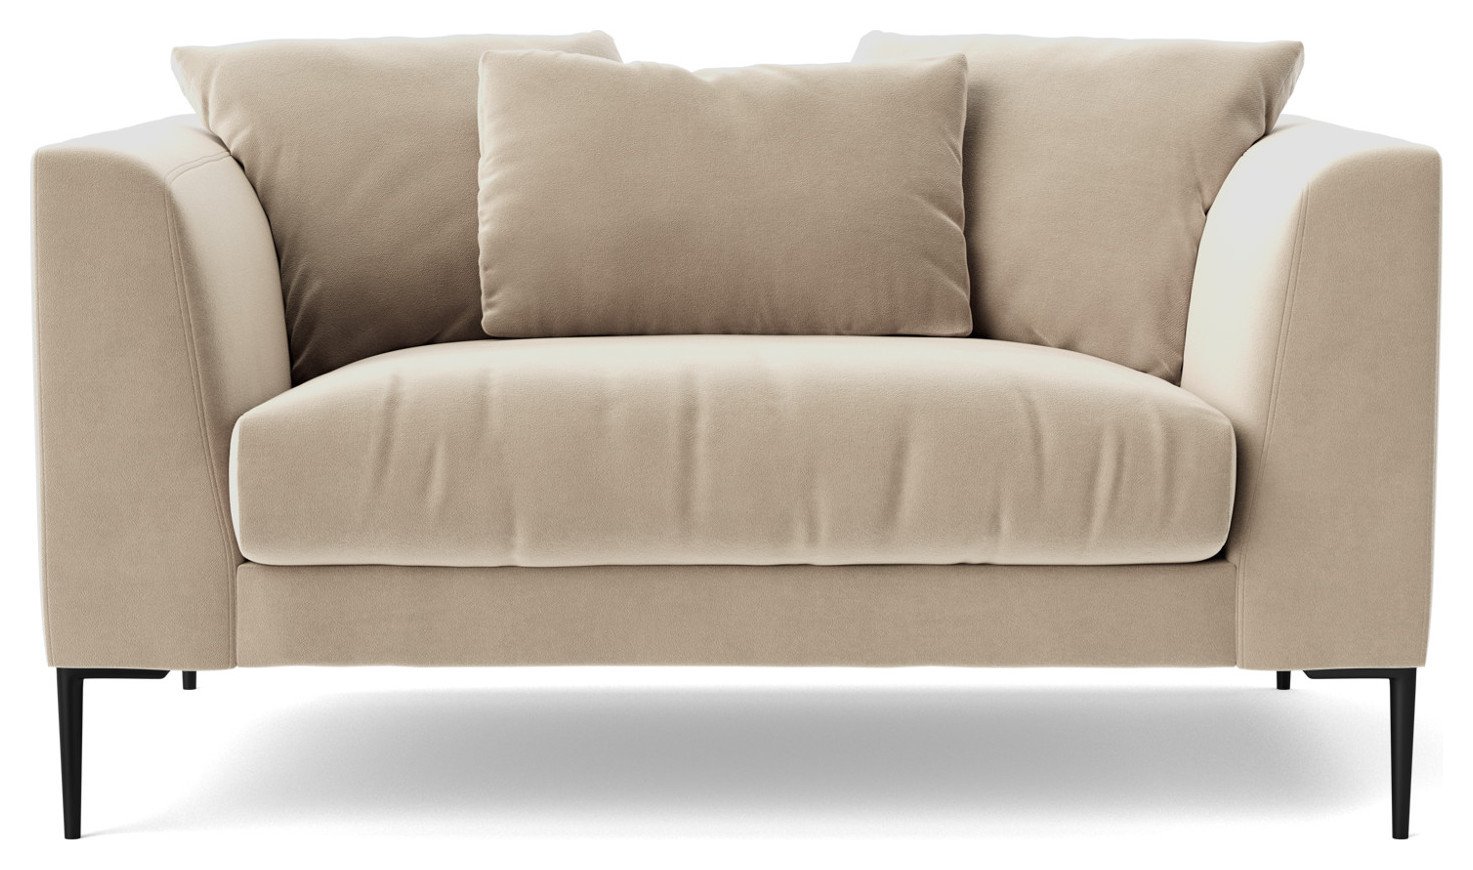 Swoon Alena Velvet Cuddle Chair - Taupe